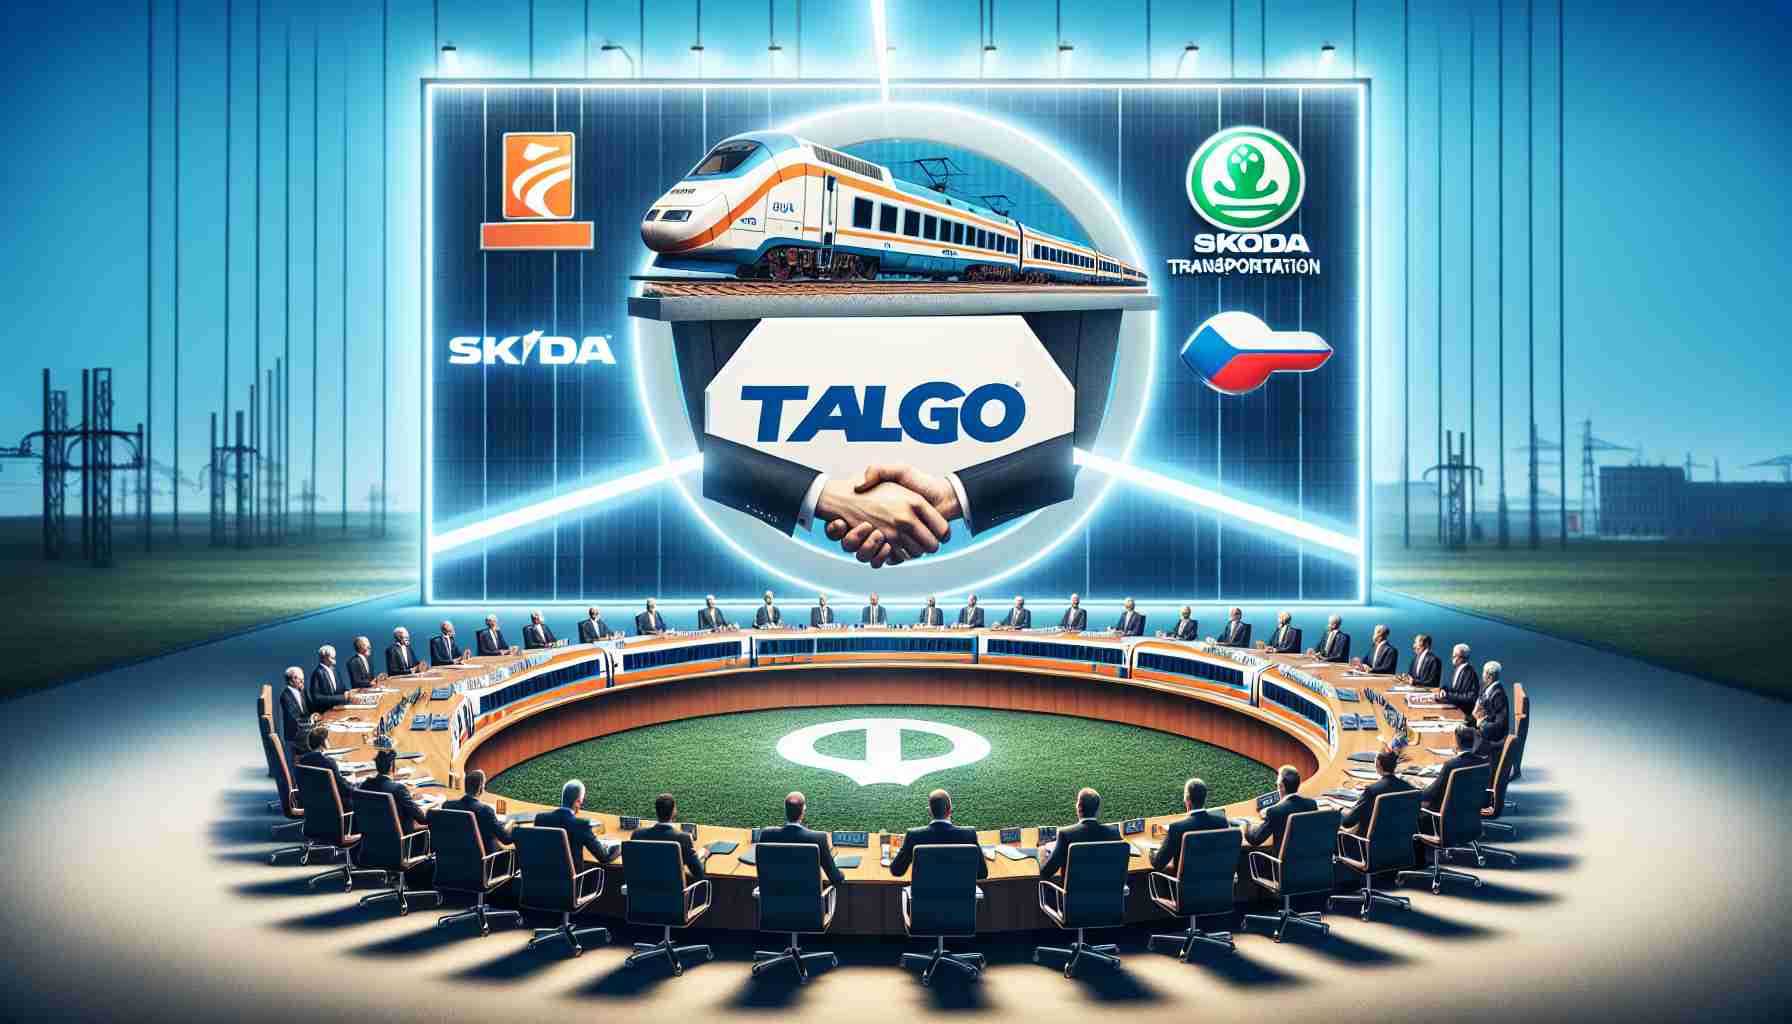 Generate a realistic, high-definition image showcasing a hypothetical business event where Talgo, the Spanish train manufacturer, is exploring a potential merger with Skoda Transportation, the Czech manufacturer of electric trains. The image should include corporate banners, boardroom meeting scenes, and a union logo designed to symbolize the merging of these two corporations.